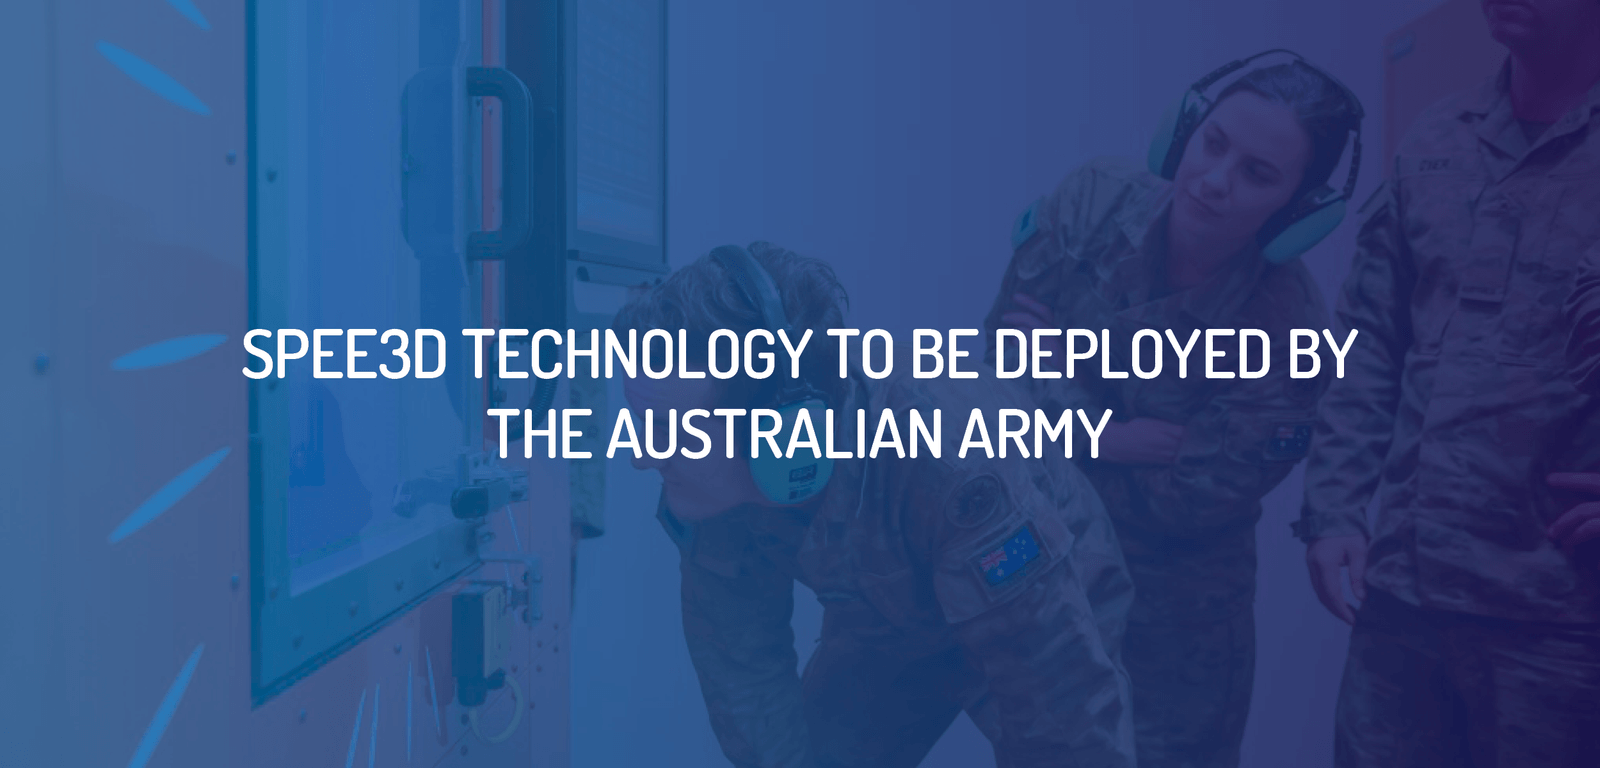 SPEE3D Metal 3D Printer Technology to be deployed by the Australian Army